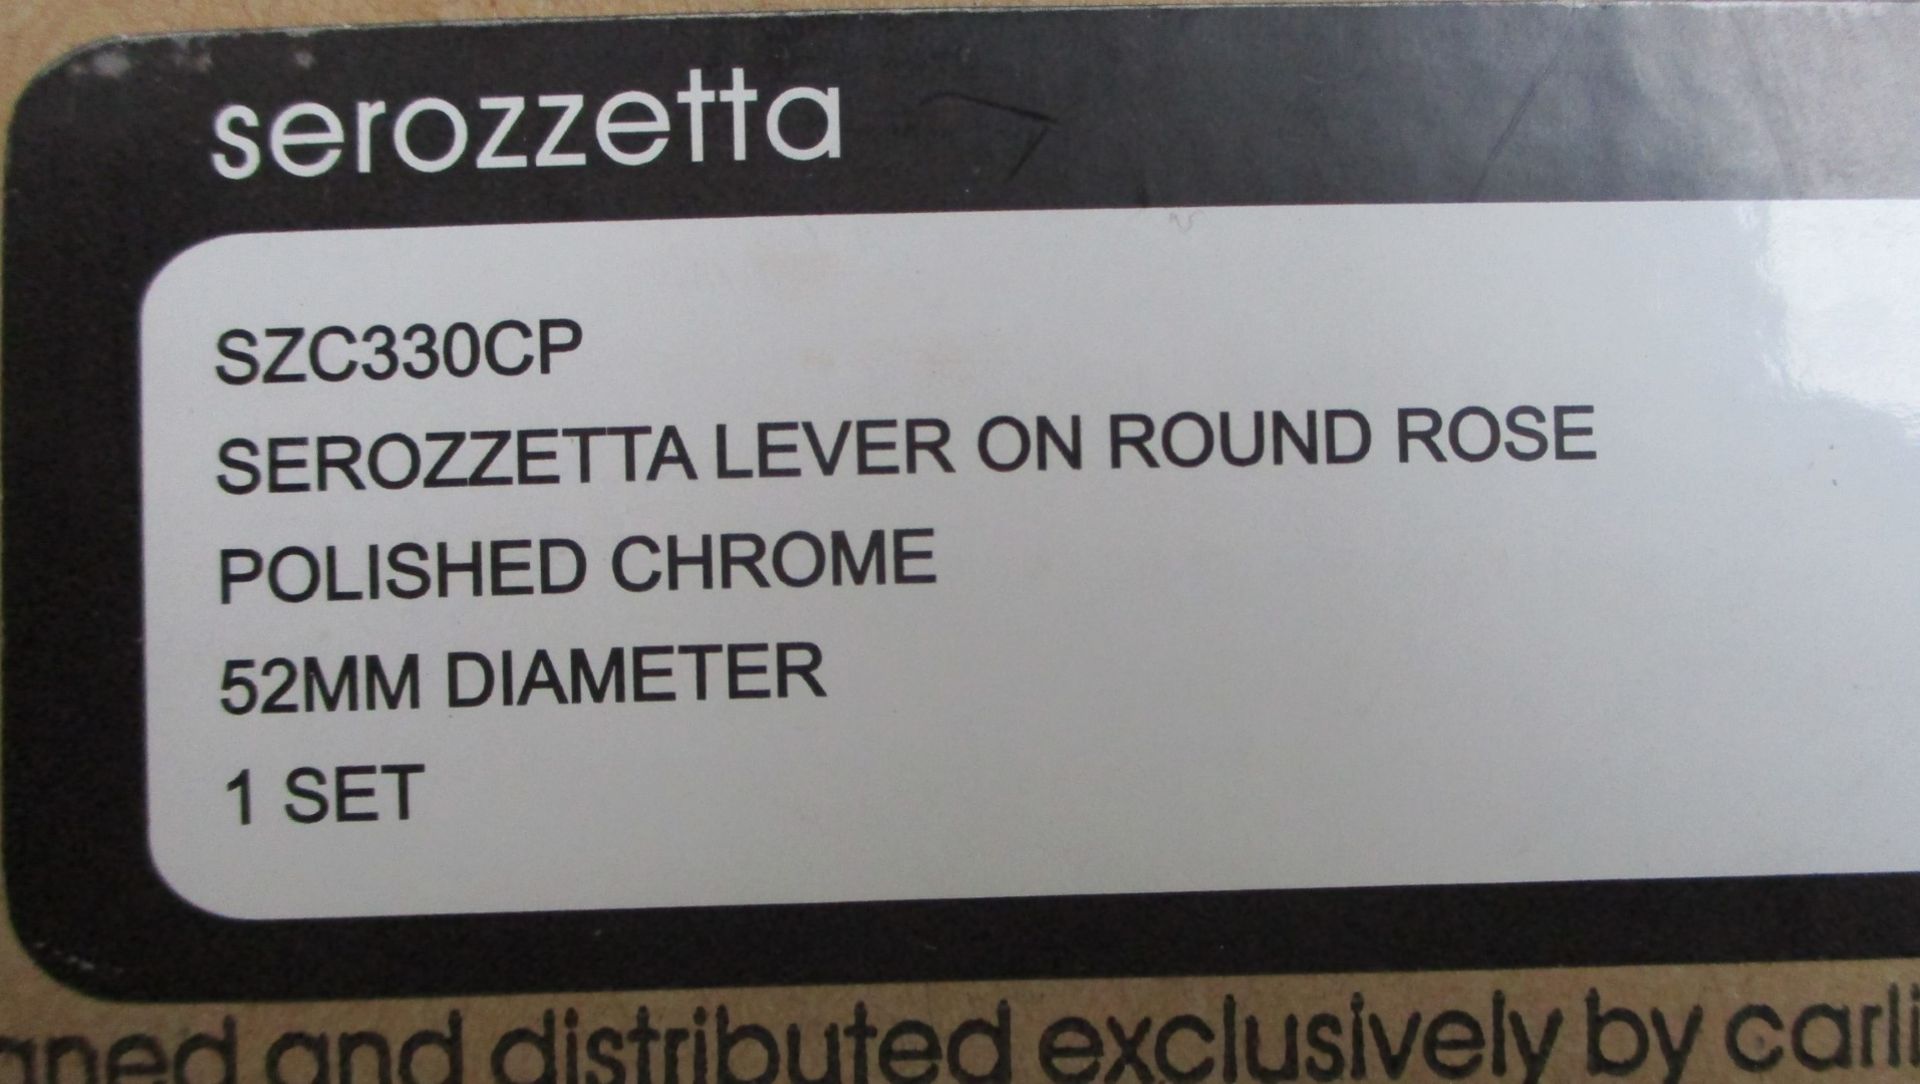 3 x Pairs of Serozzetta Internal Door Handle Levers in Polished Chrome - Brand New Stock - Product - Image 3 of 4